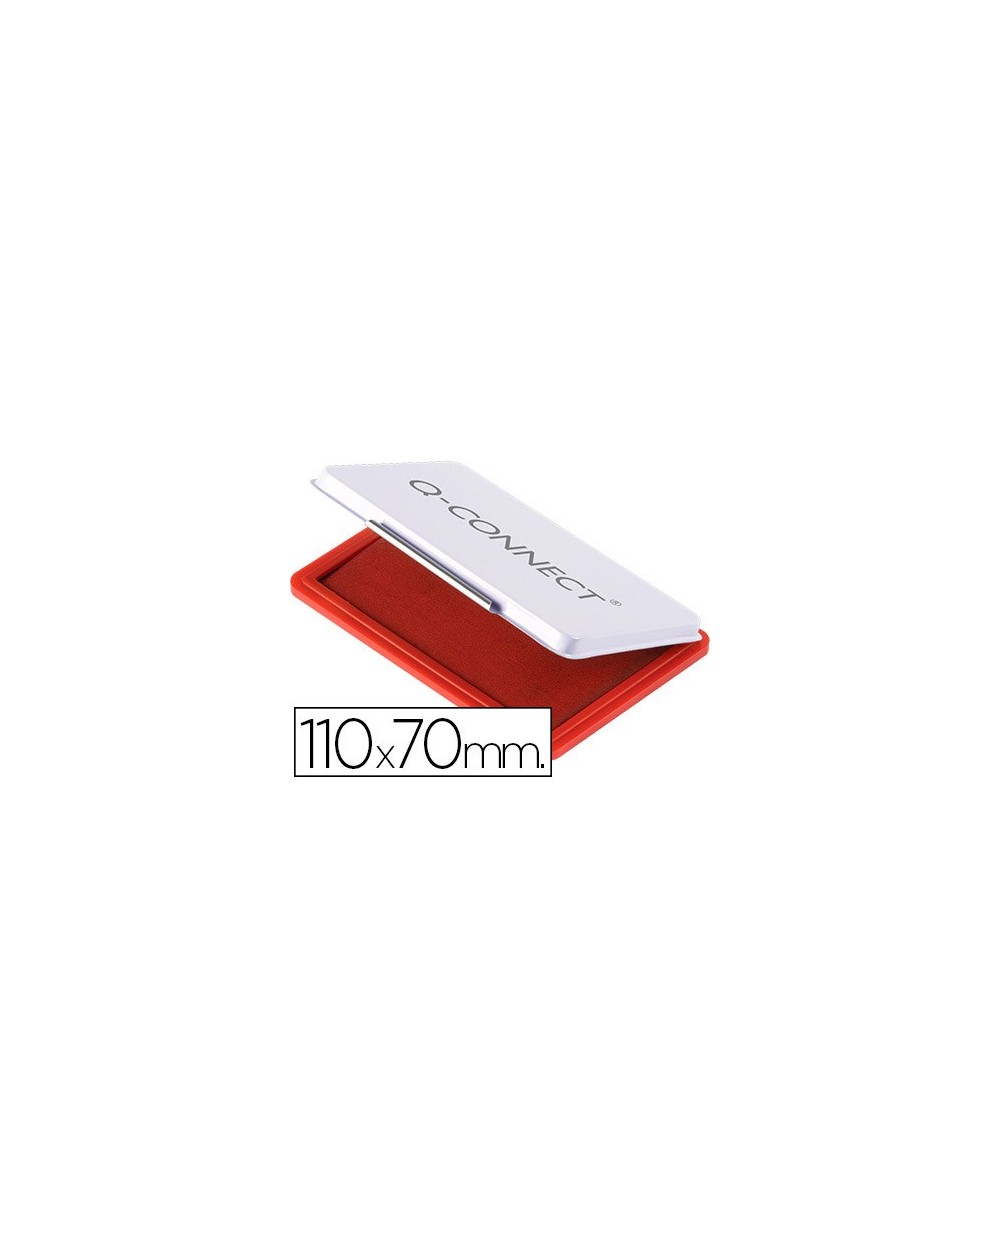 Tampon q connect n2 110x70 mm rojo